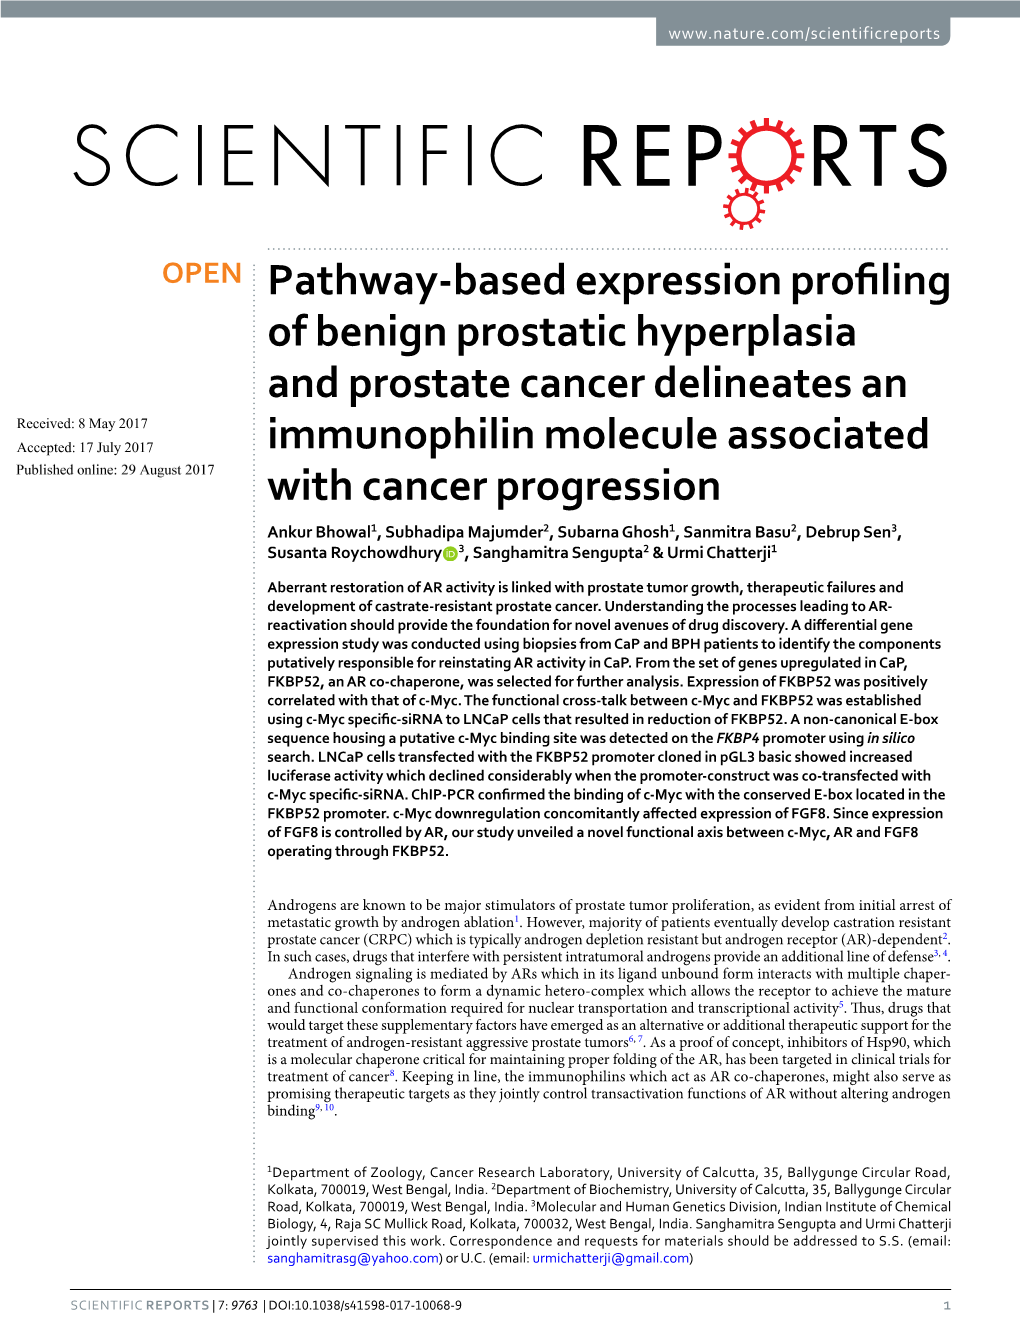 Pathway-Based Expression Profiling of Benign Prostatic Hyperplasia and Prostate Cancer Delineates an Immunophilin Molecule Assoc